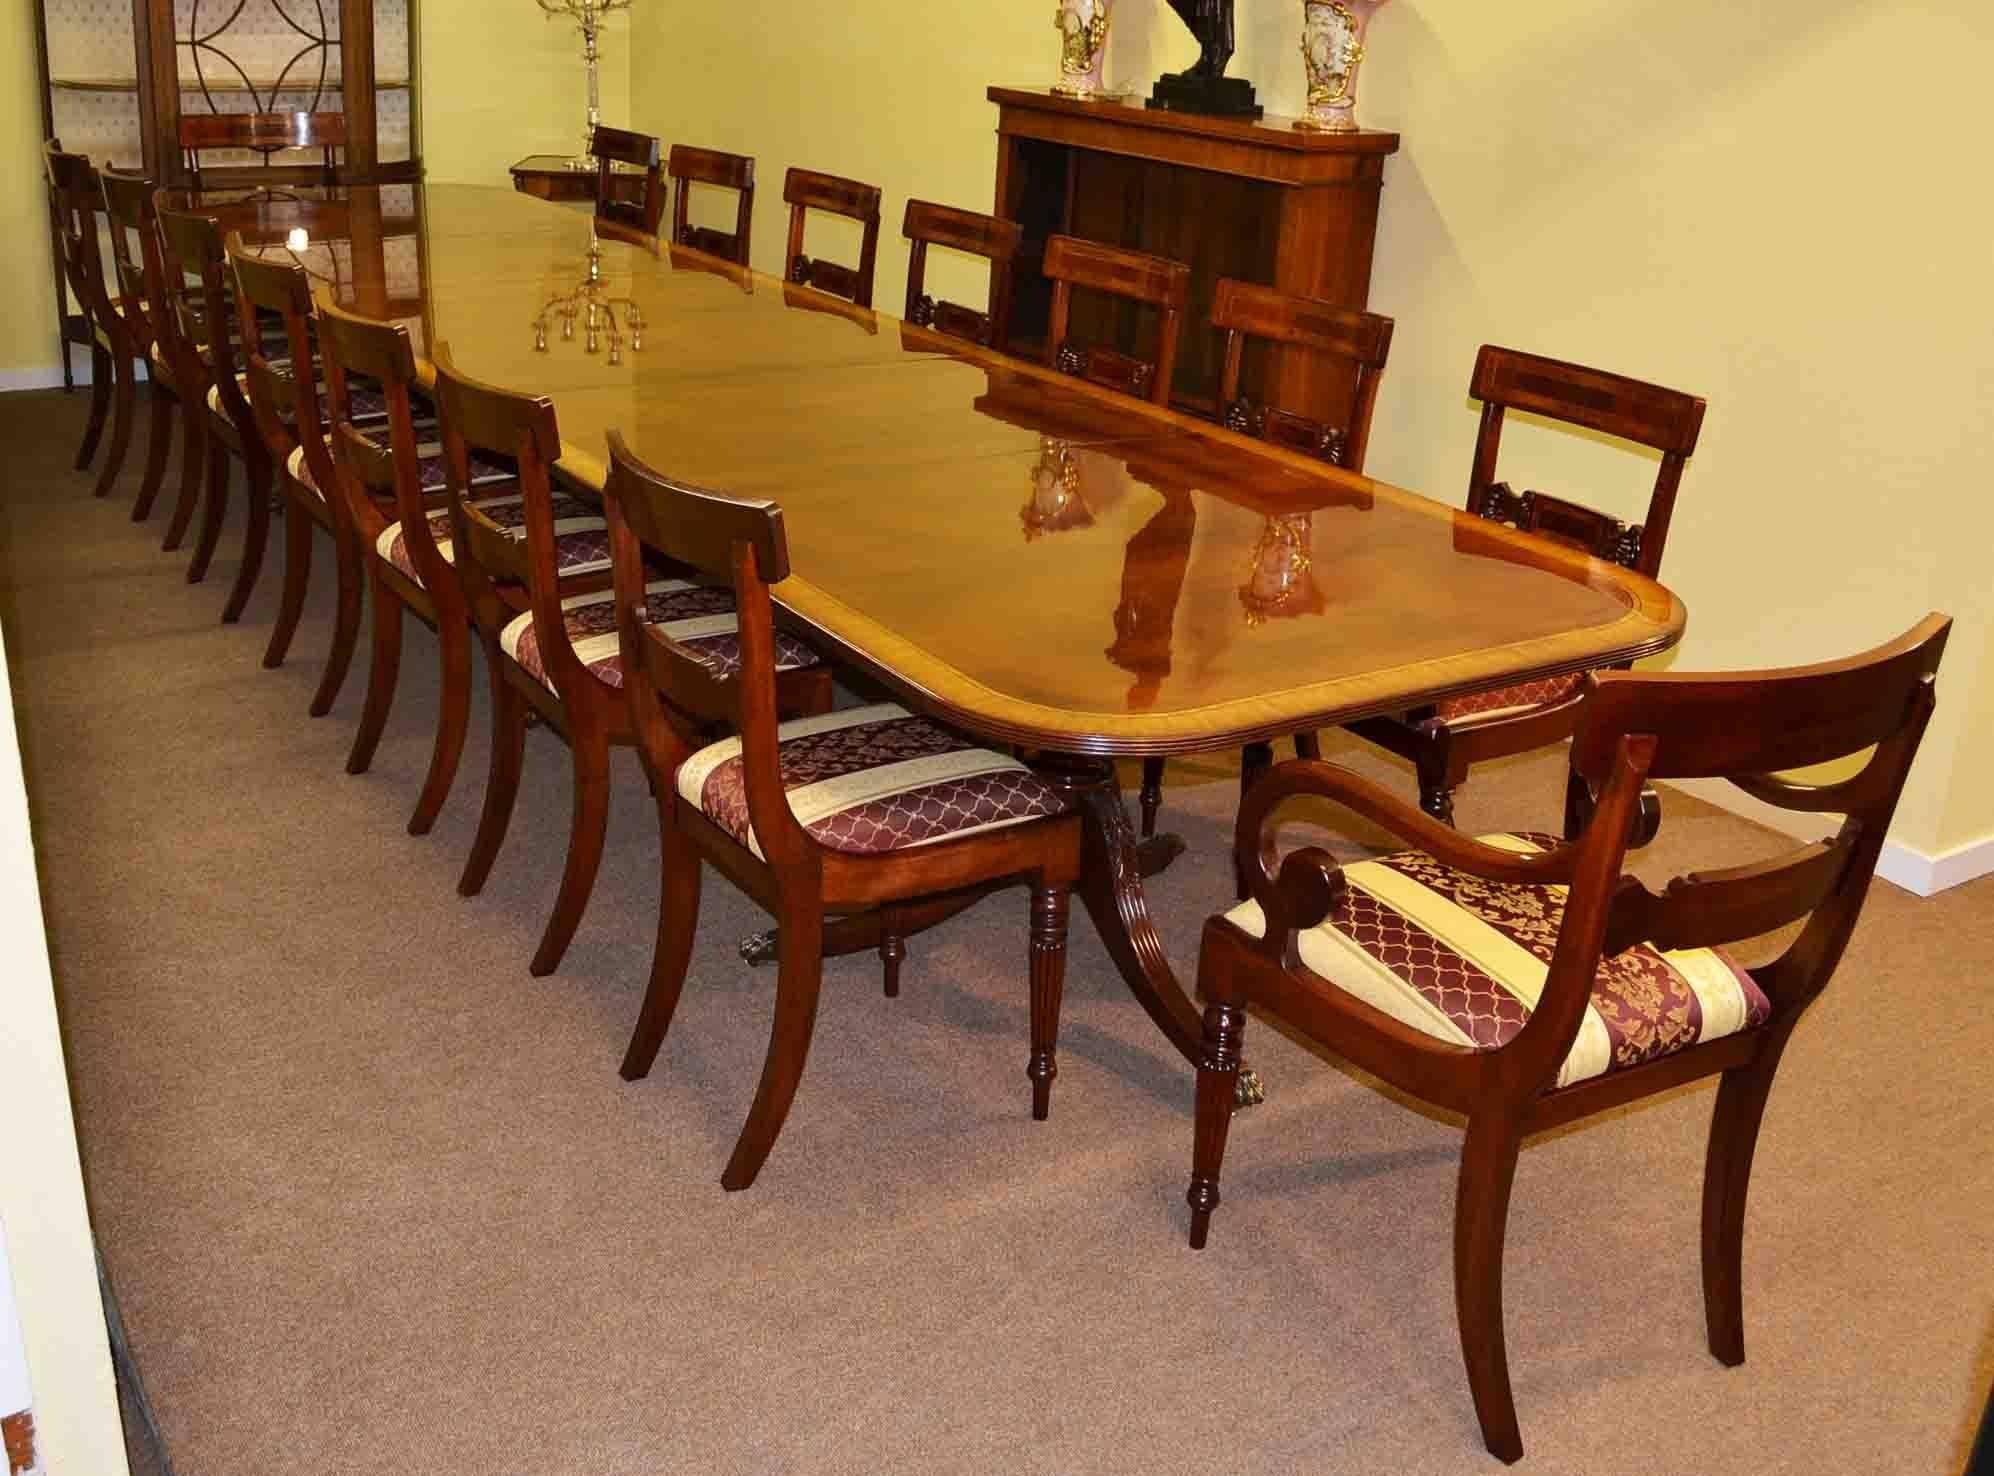 This is a beautiful Regency style dining table complete with the matching set of sixteen chairs, dating from the last quarter of the 20th century.

The table is made of flame mahogany with superb satinwood crossbanded decoration. It will seat